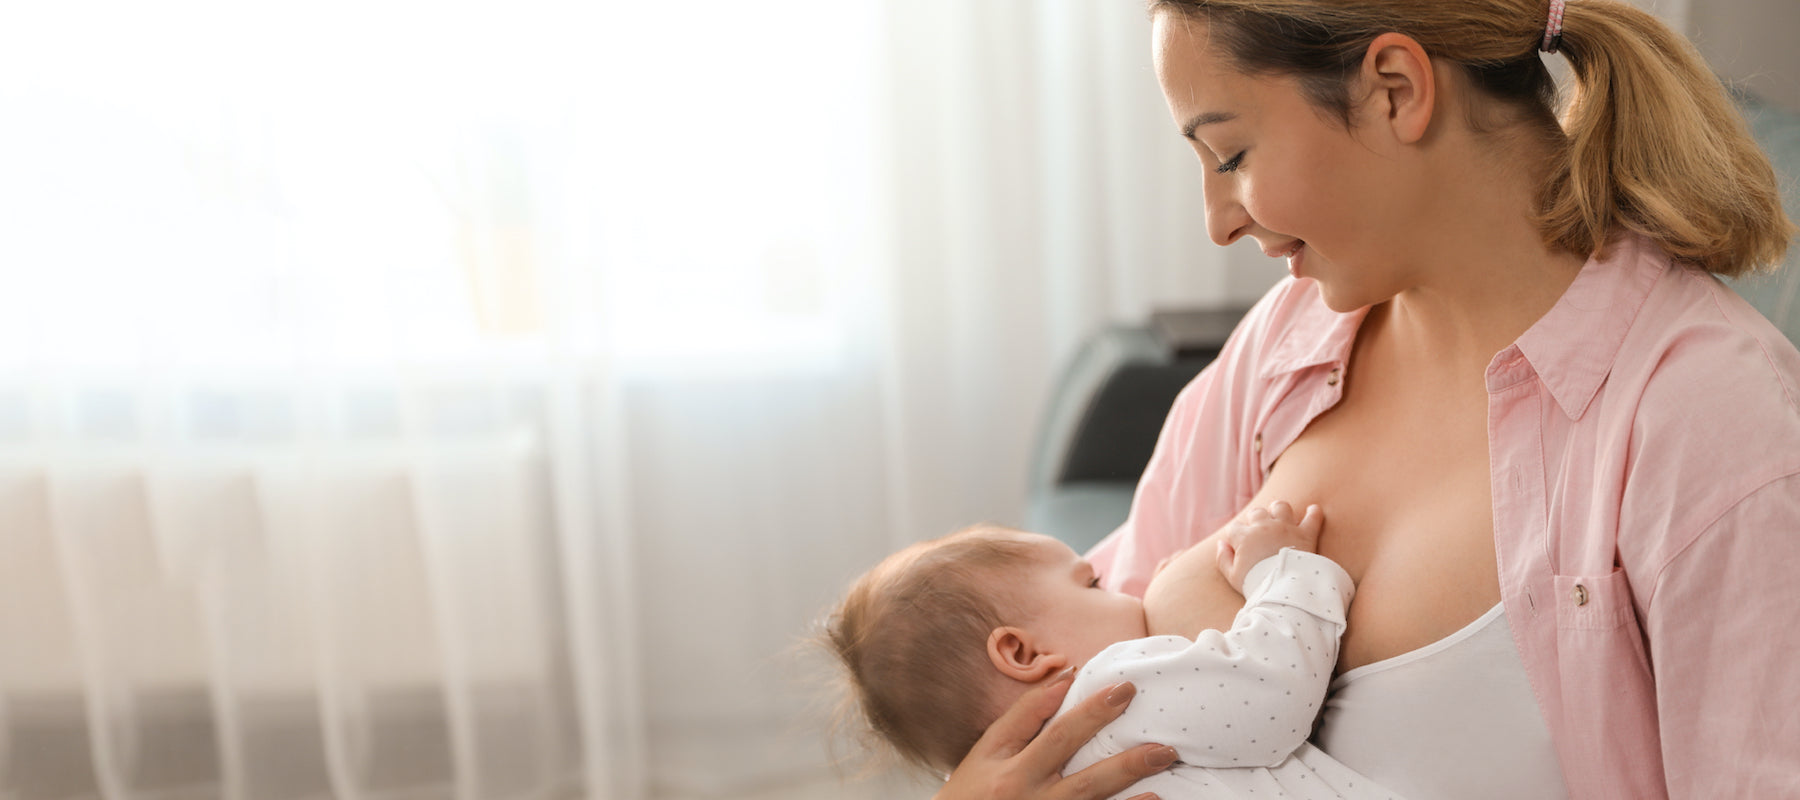 Finding the Right Type of Breastfeeding Techniques